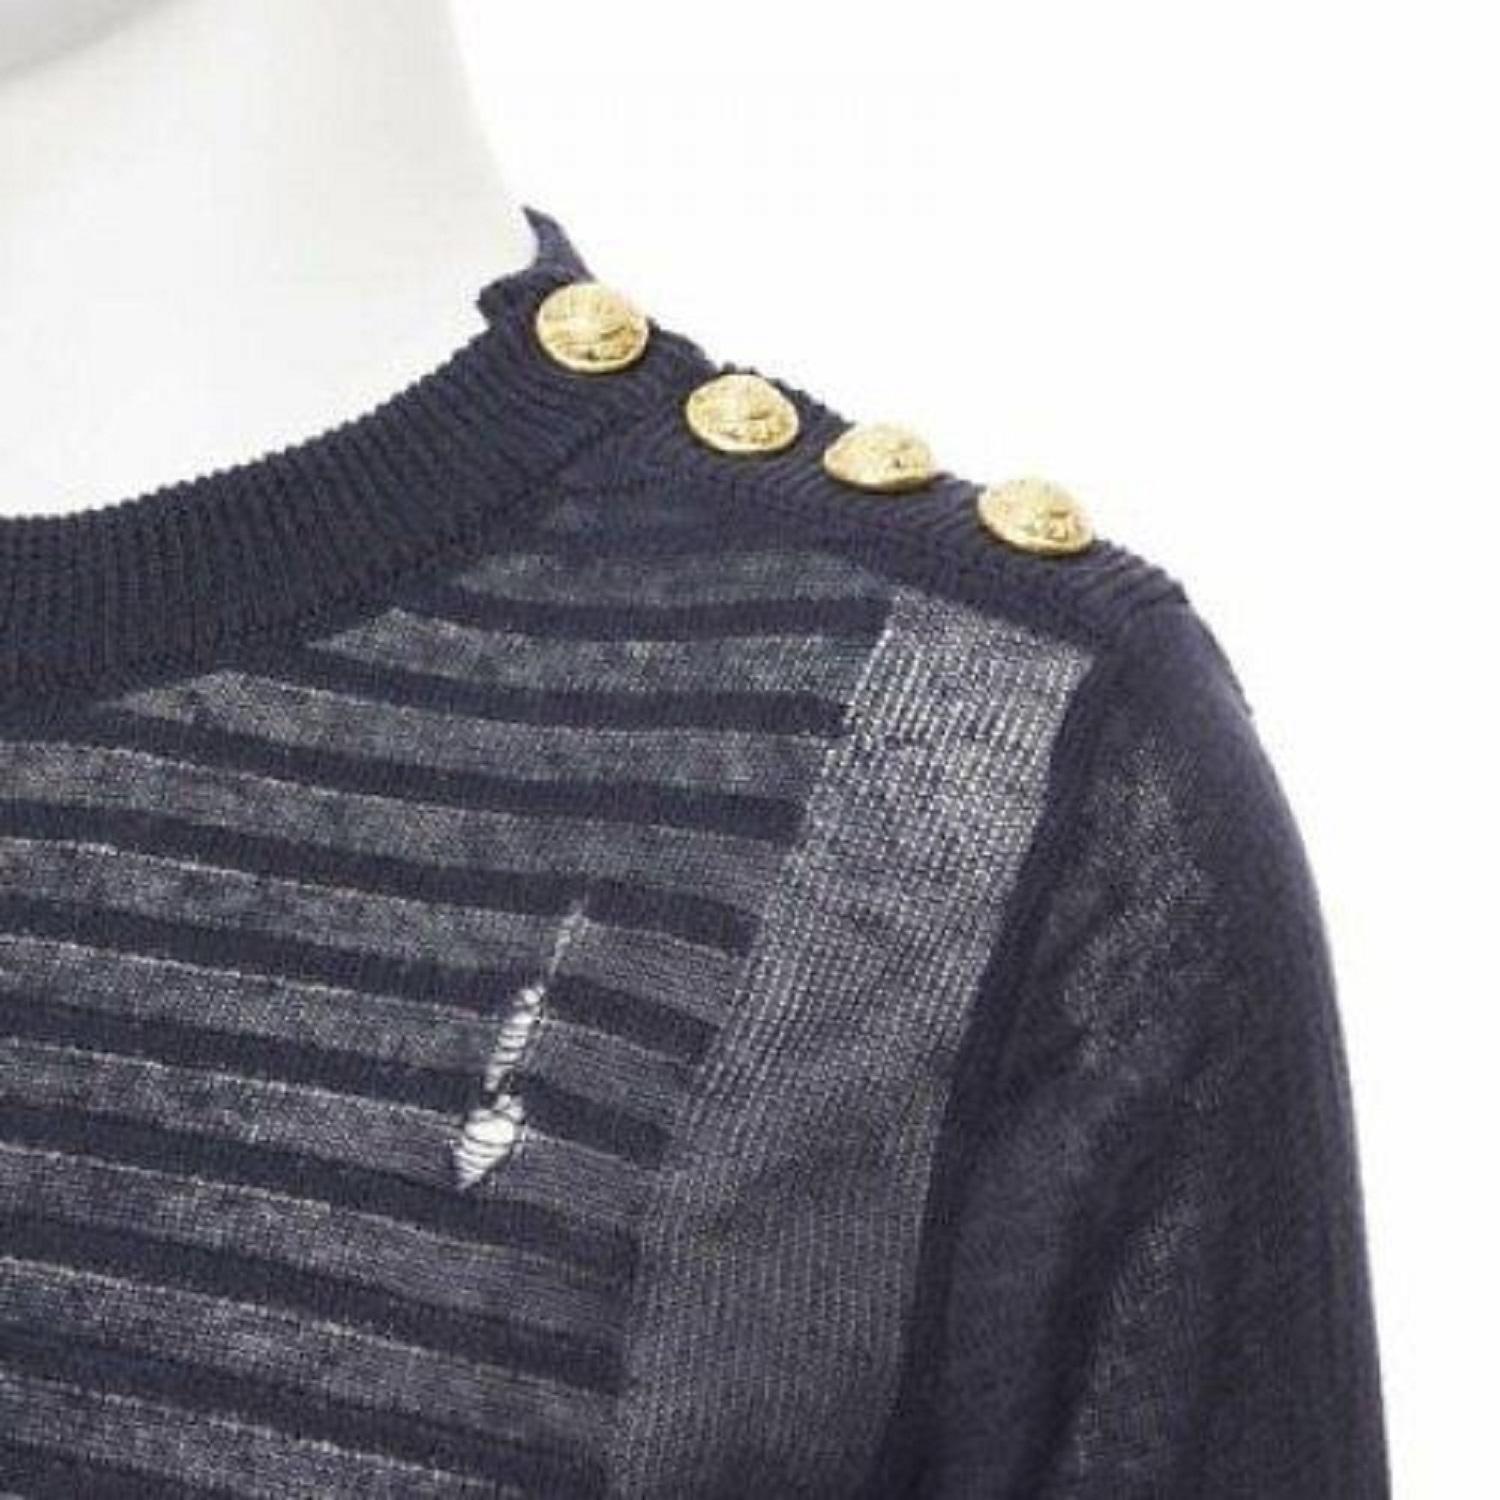 new BALMAIN 100% linen navy stripe gold military button distressed sweater XS
Reference: TGAS/A05562
Brand: Balmain
Designer: Olivier Rousteing
Model: Distressed sweater
Material: Linen
Color: Black
Pattern: Striped
Extra Details: BALMAIN style